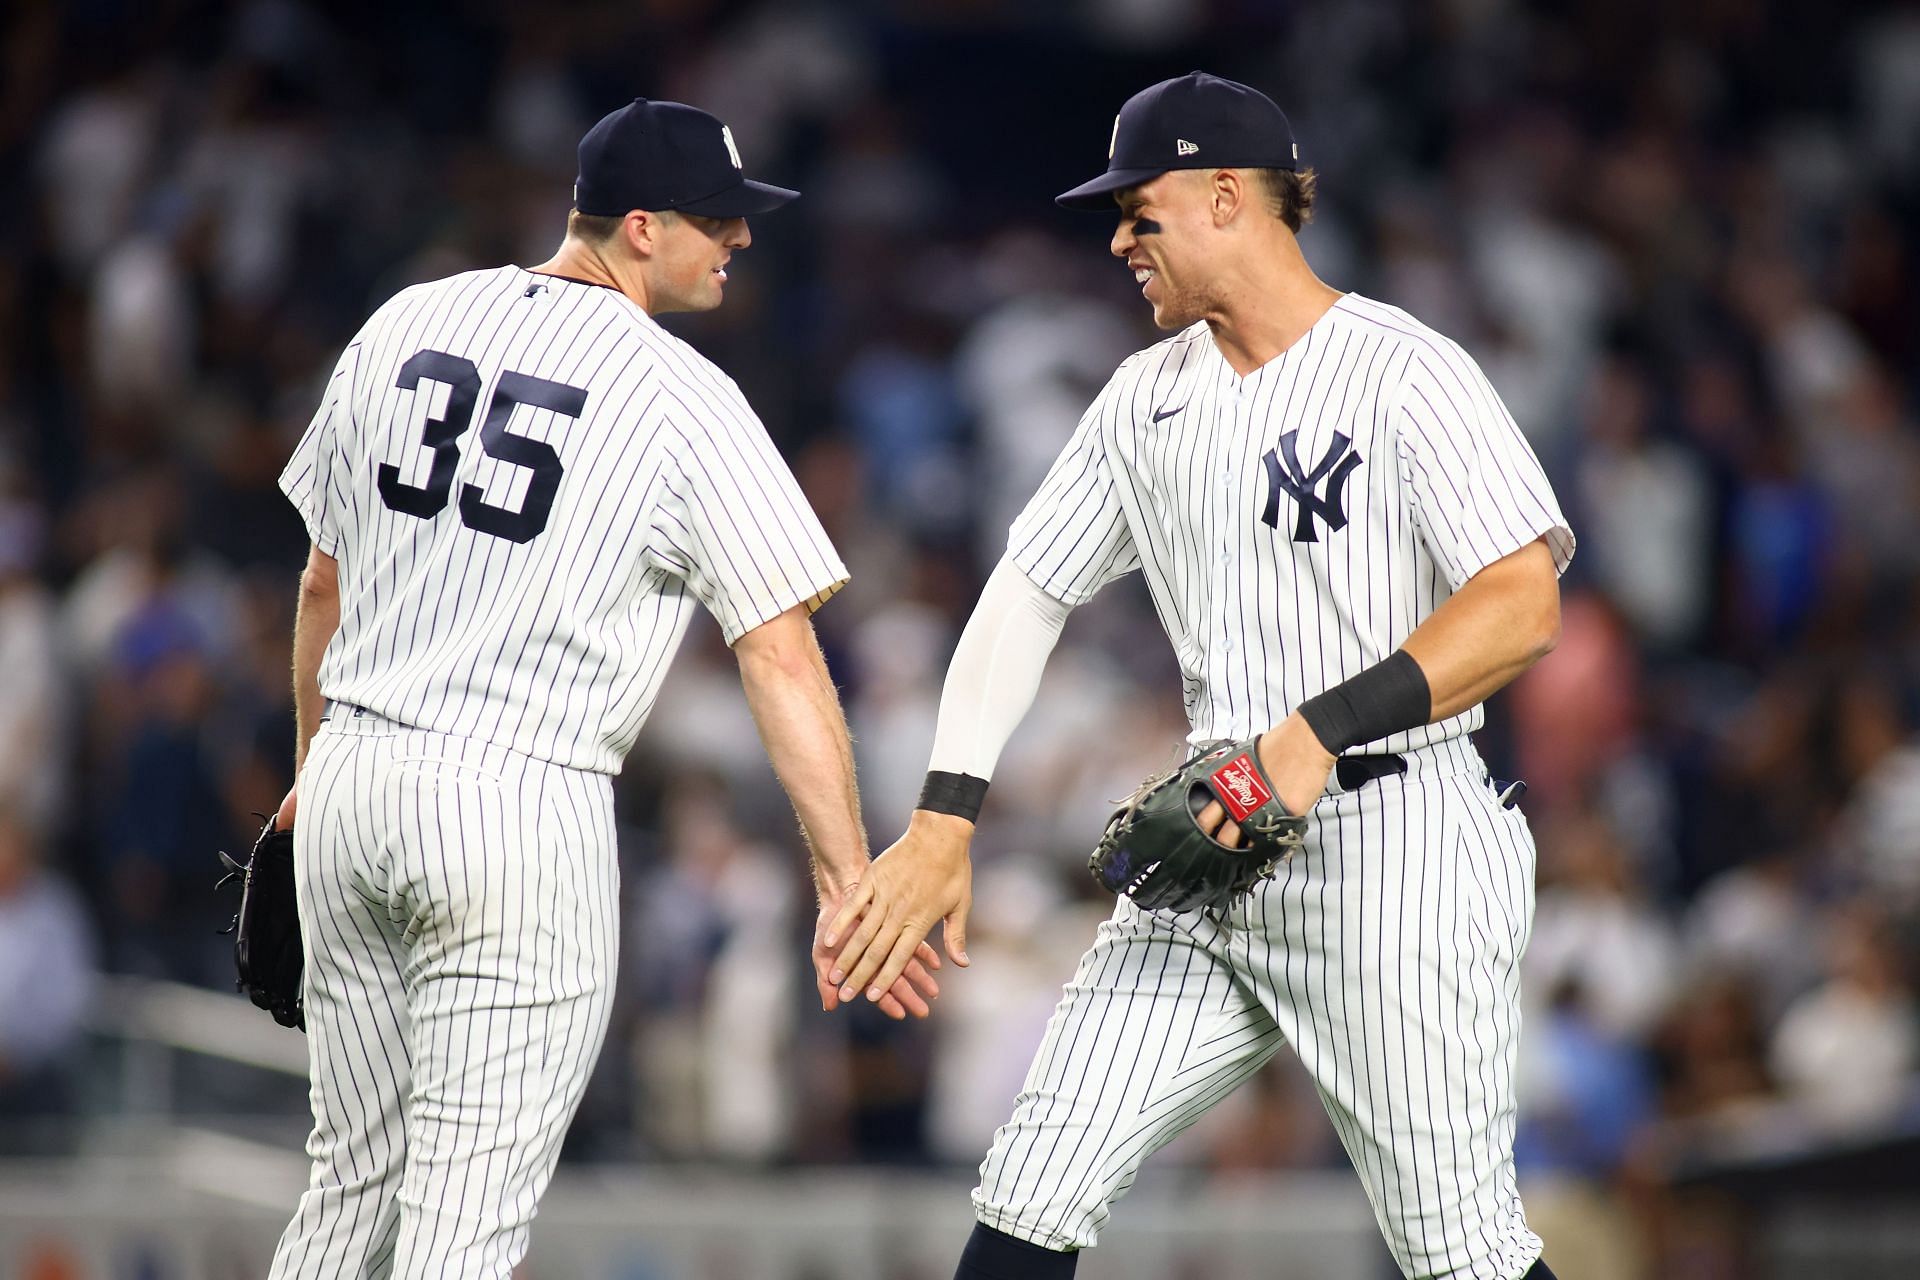 The Yankees have improved to an increible 46-16.